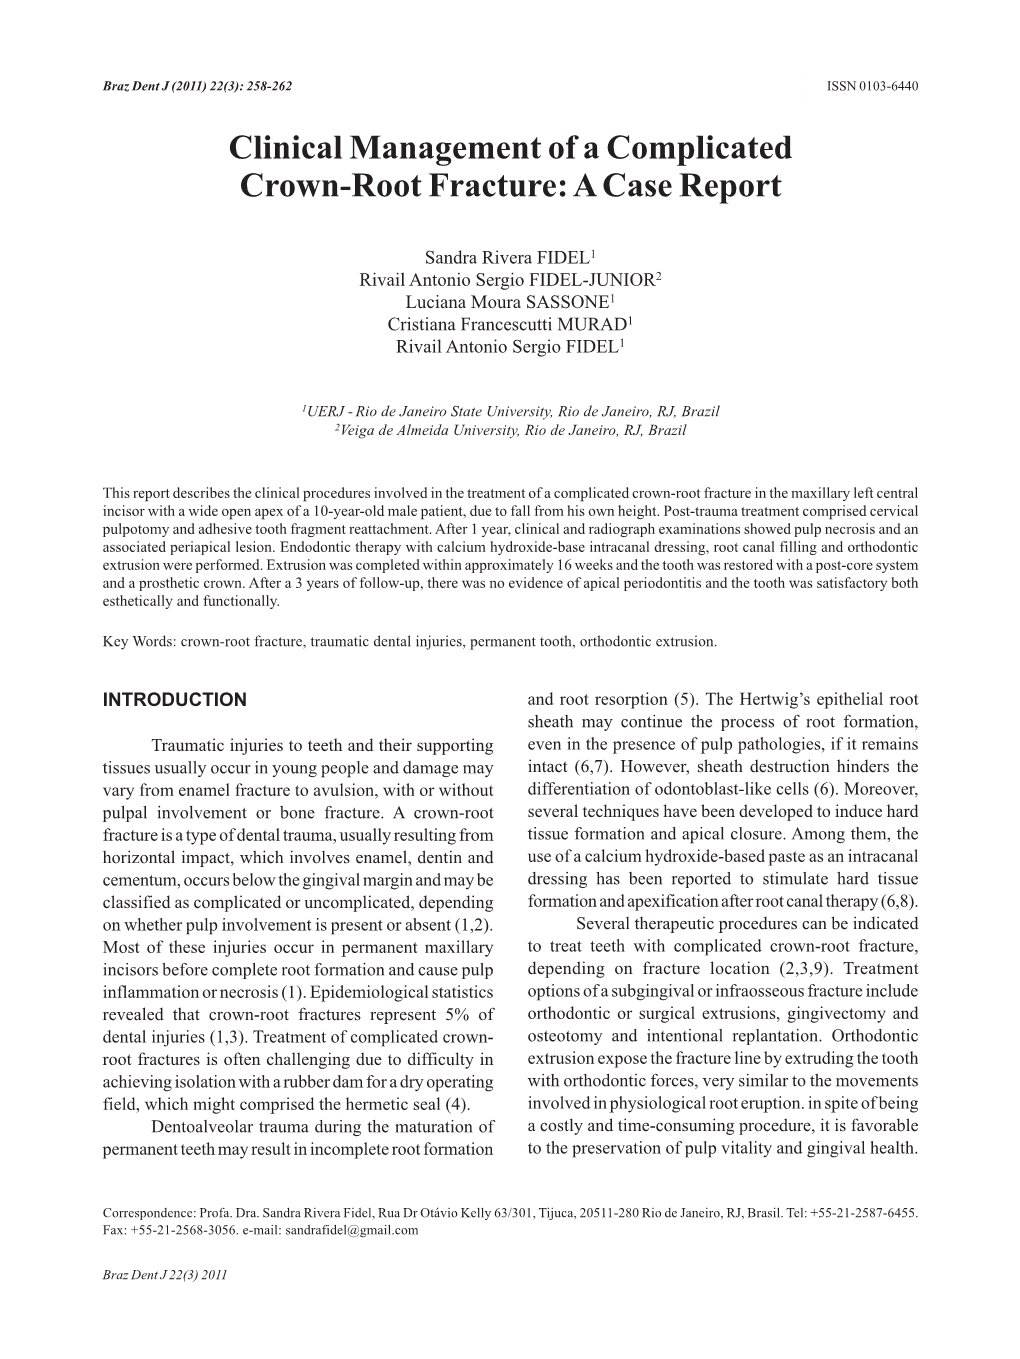 Clinical Management of a Complicated Crown-Root Fracture: a Case Report